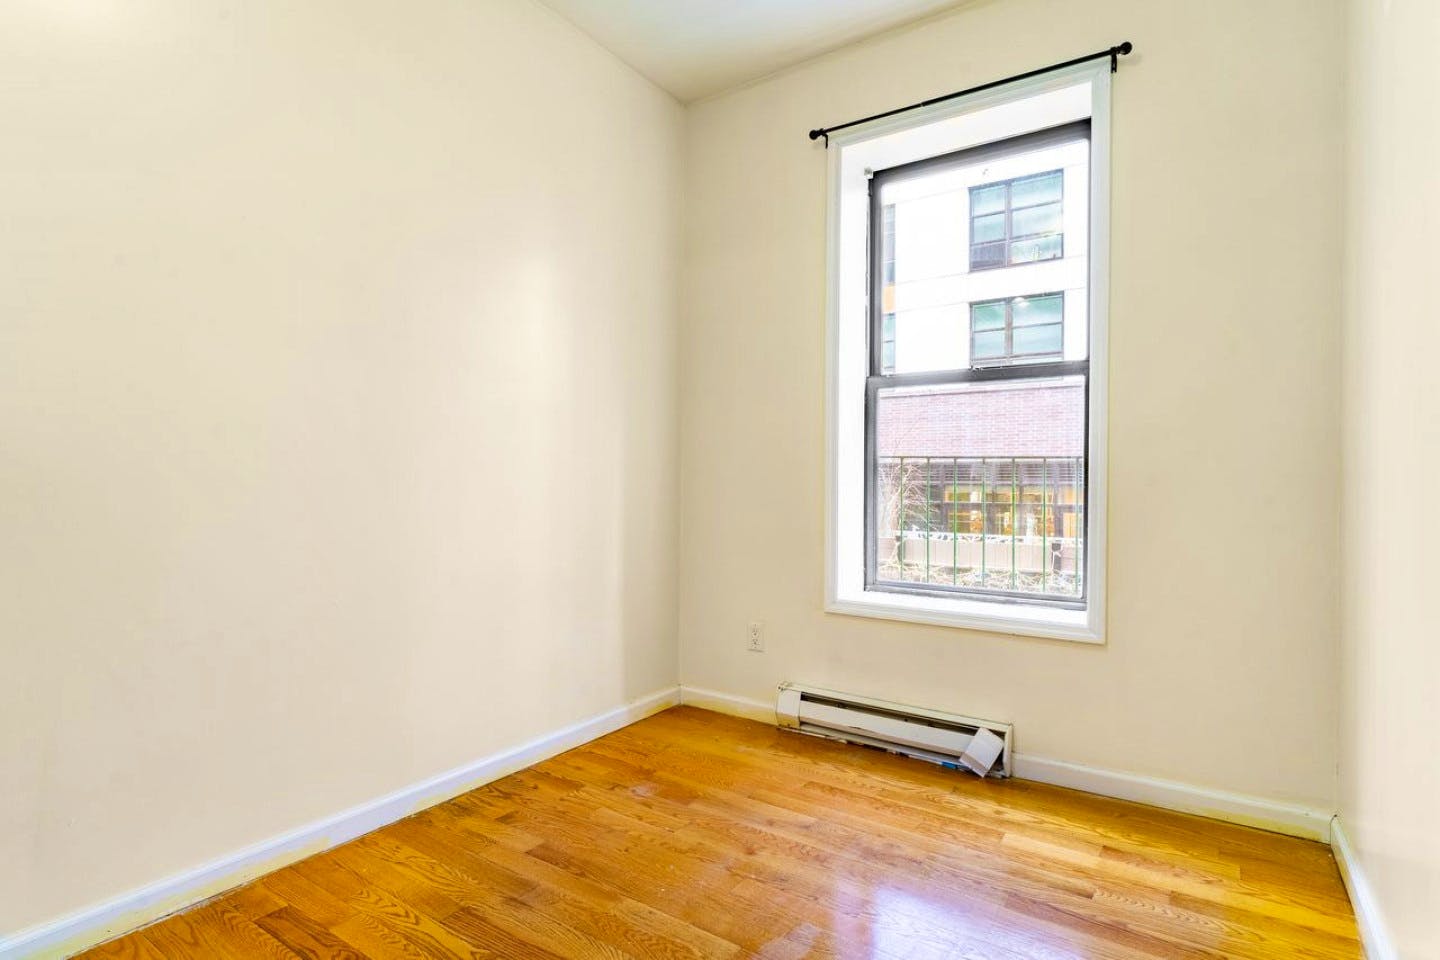 Beautiful Stylish Apt. close to both Central Park and Riverside Park